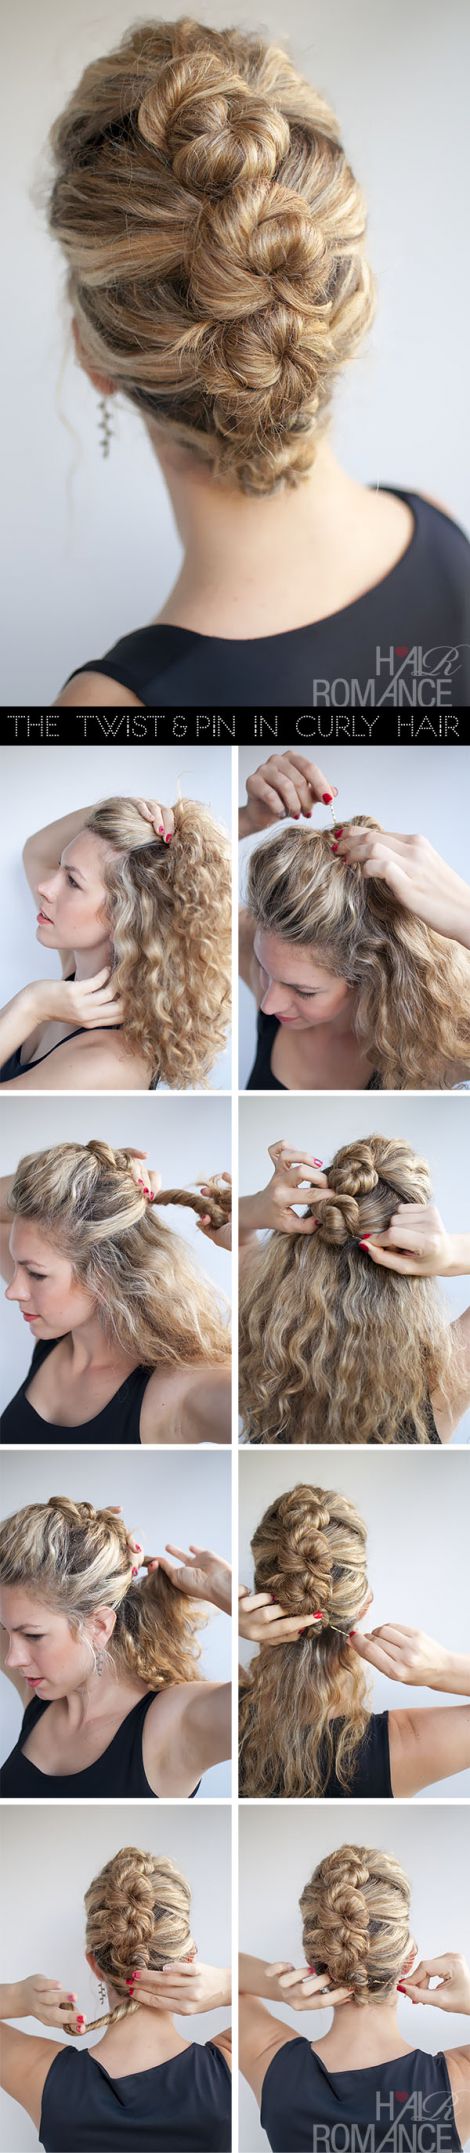 hair-romance-hairstyle-tutorial-the-french-twist-and-pin-in-curly-hair.jpg (164.09 Kb)